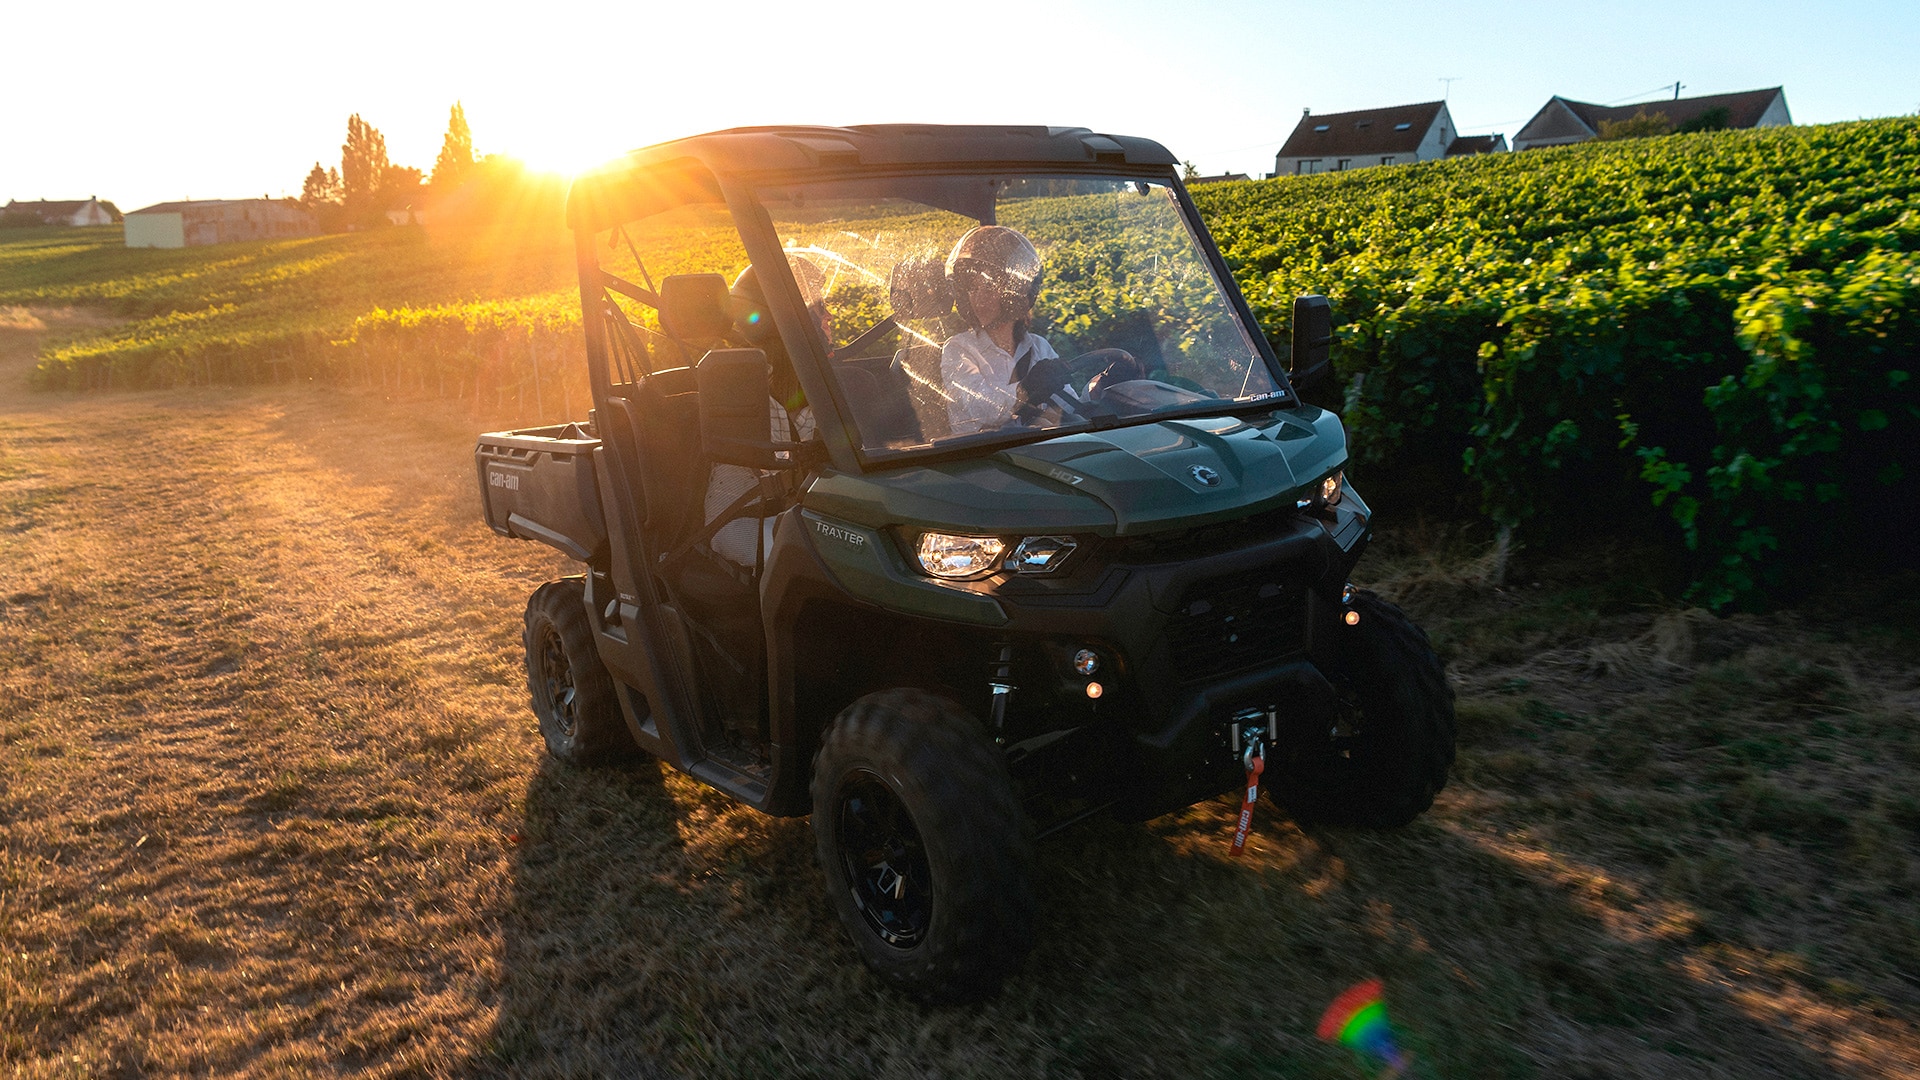 Riders riding a Can-Am Defender SxS on the vineyard